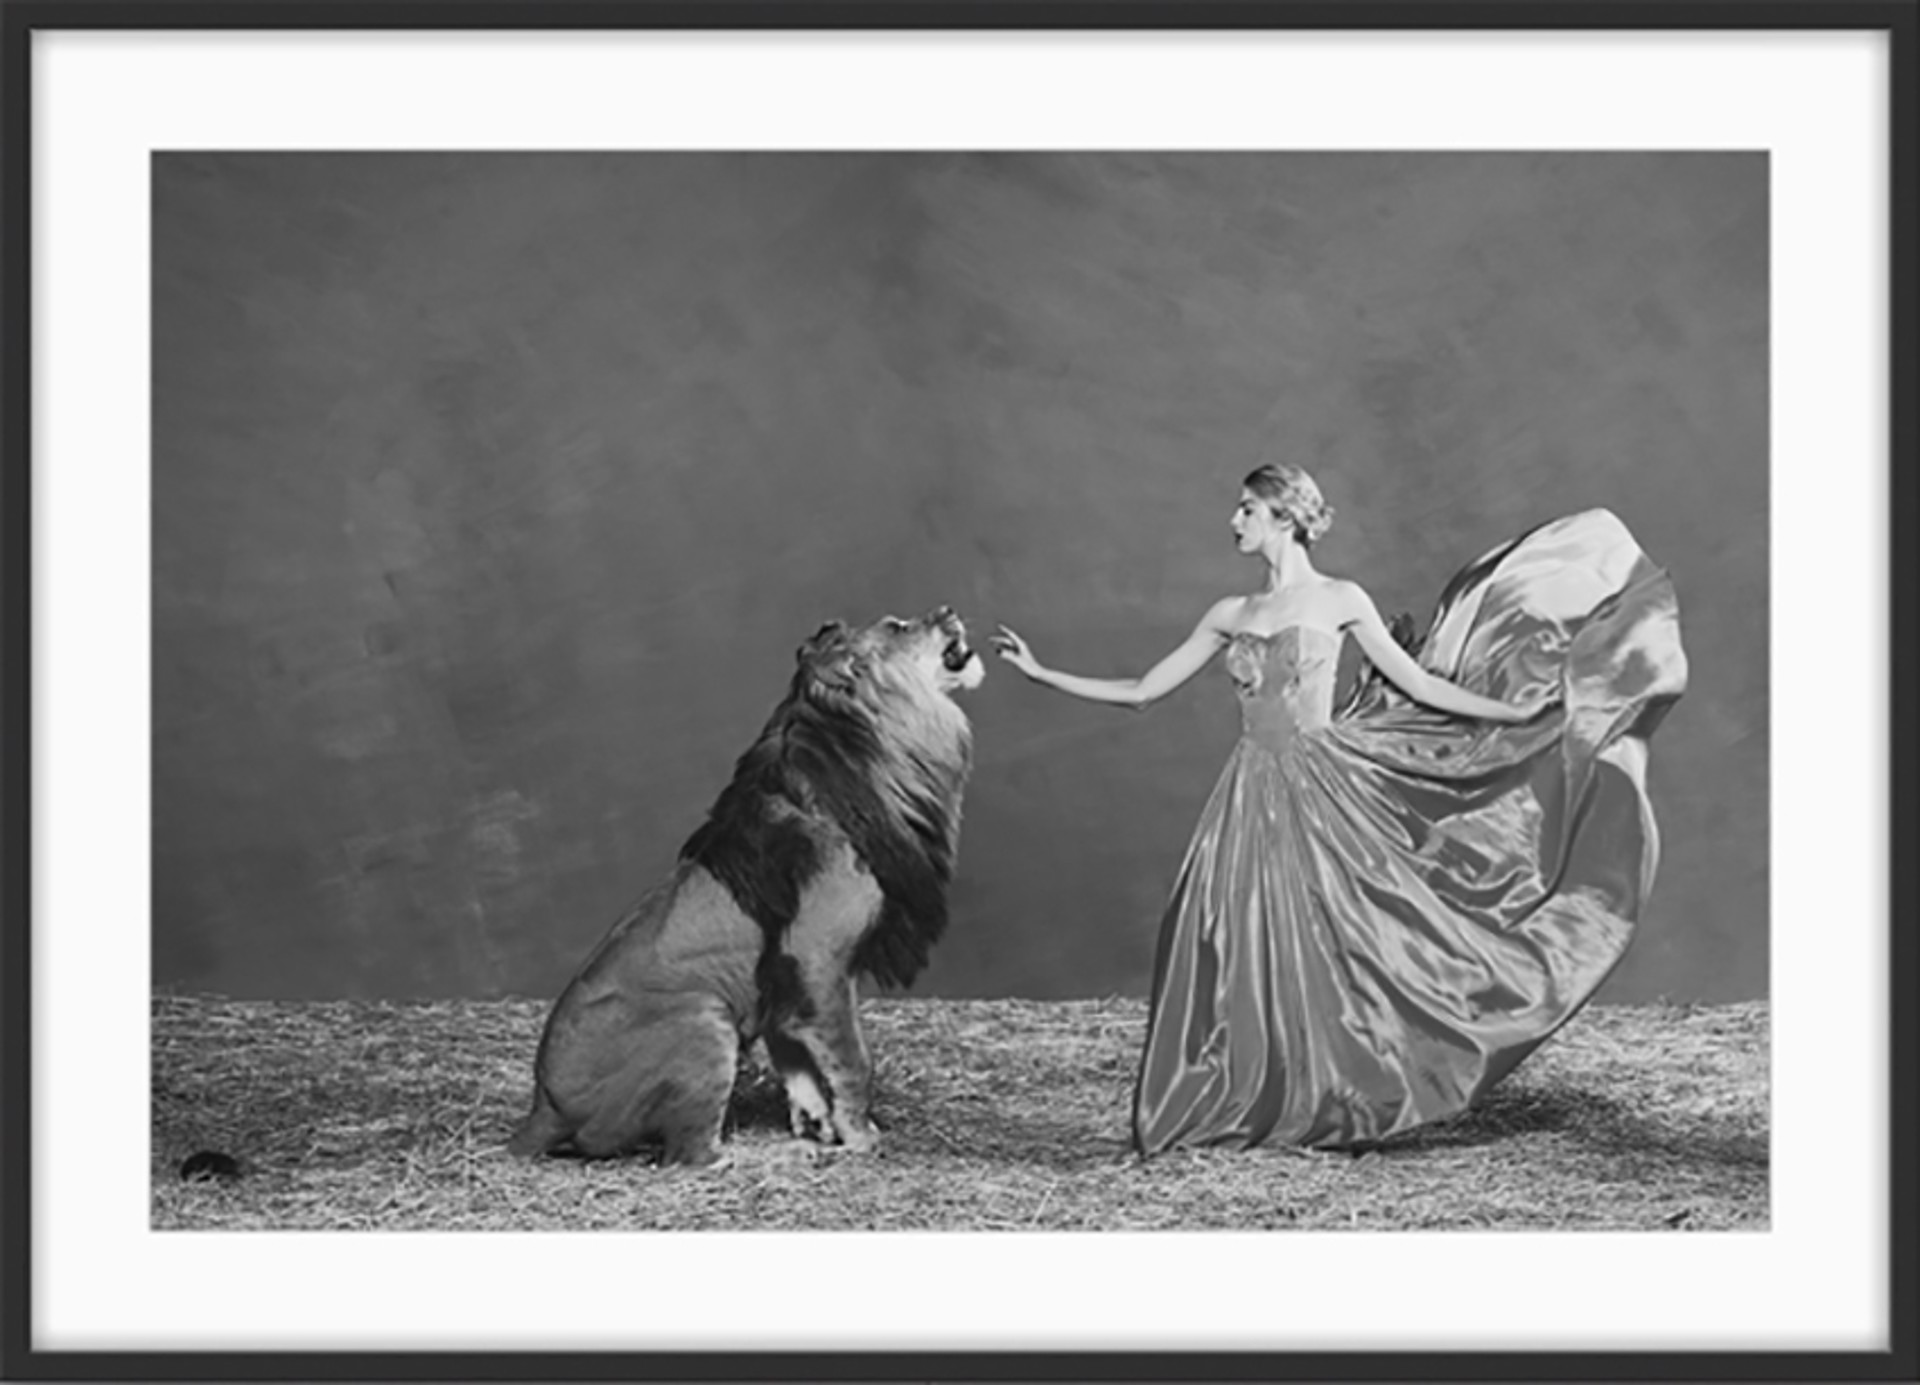 The Lion Queen by Tyler Shields